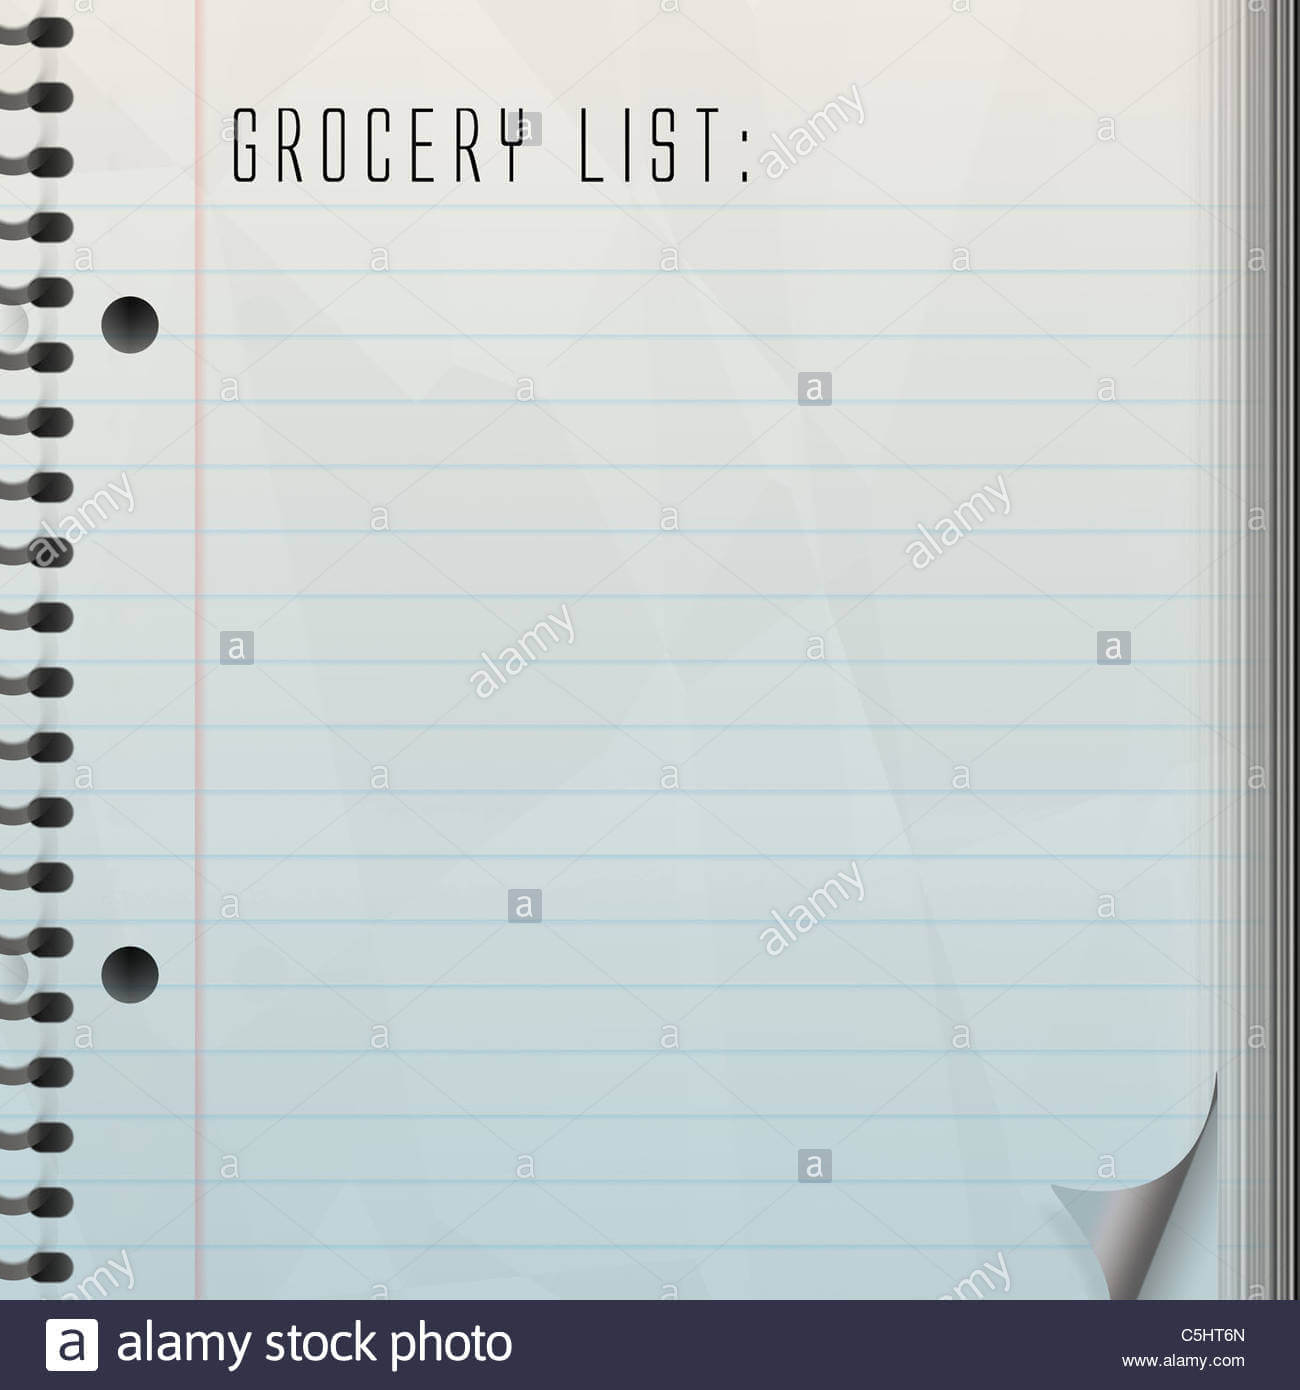 A Blank Grocery List With A Page Curl Stock Photo: 37886205 Regarding Blank Grocery Shopping List Template